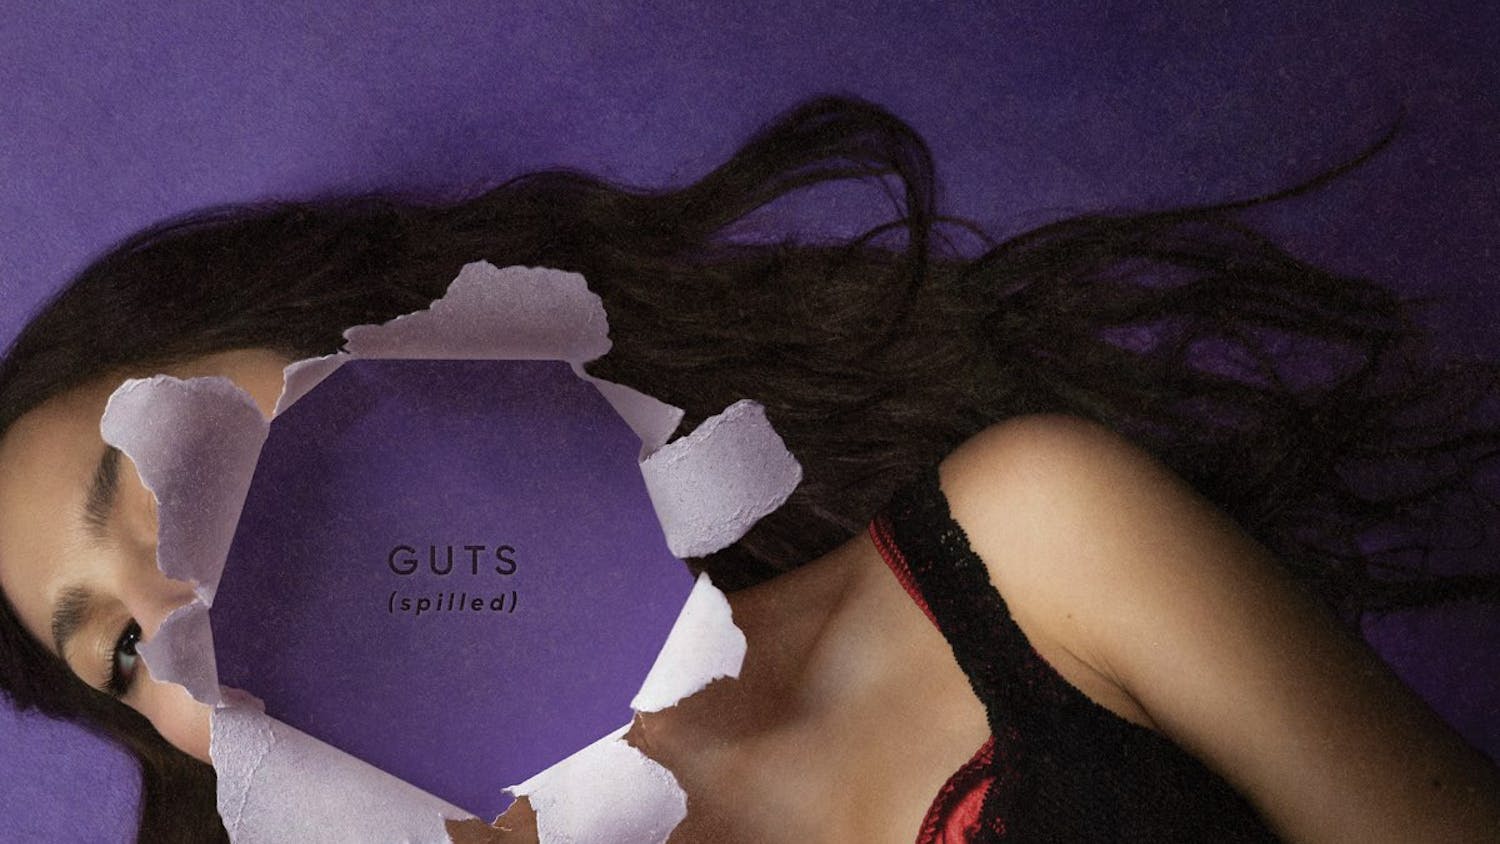 Olivia Rodrigo was not done spilling her guts and has released a deluxe version of “GUTS,” featuring five new tracks. (Photo courtesy of Apple Music)